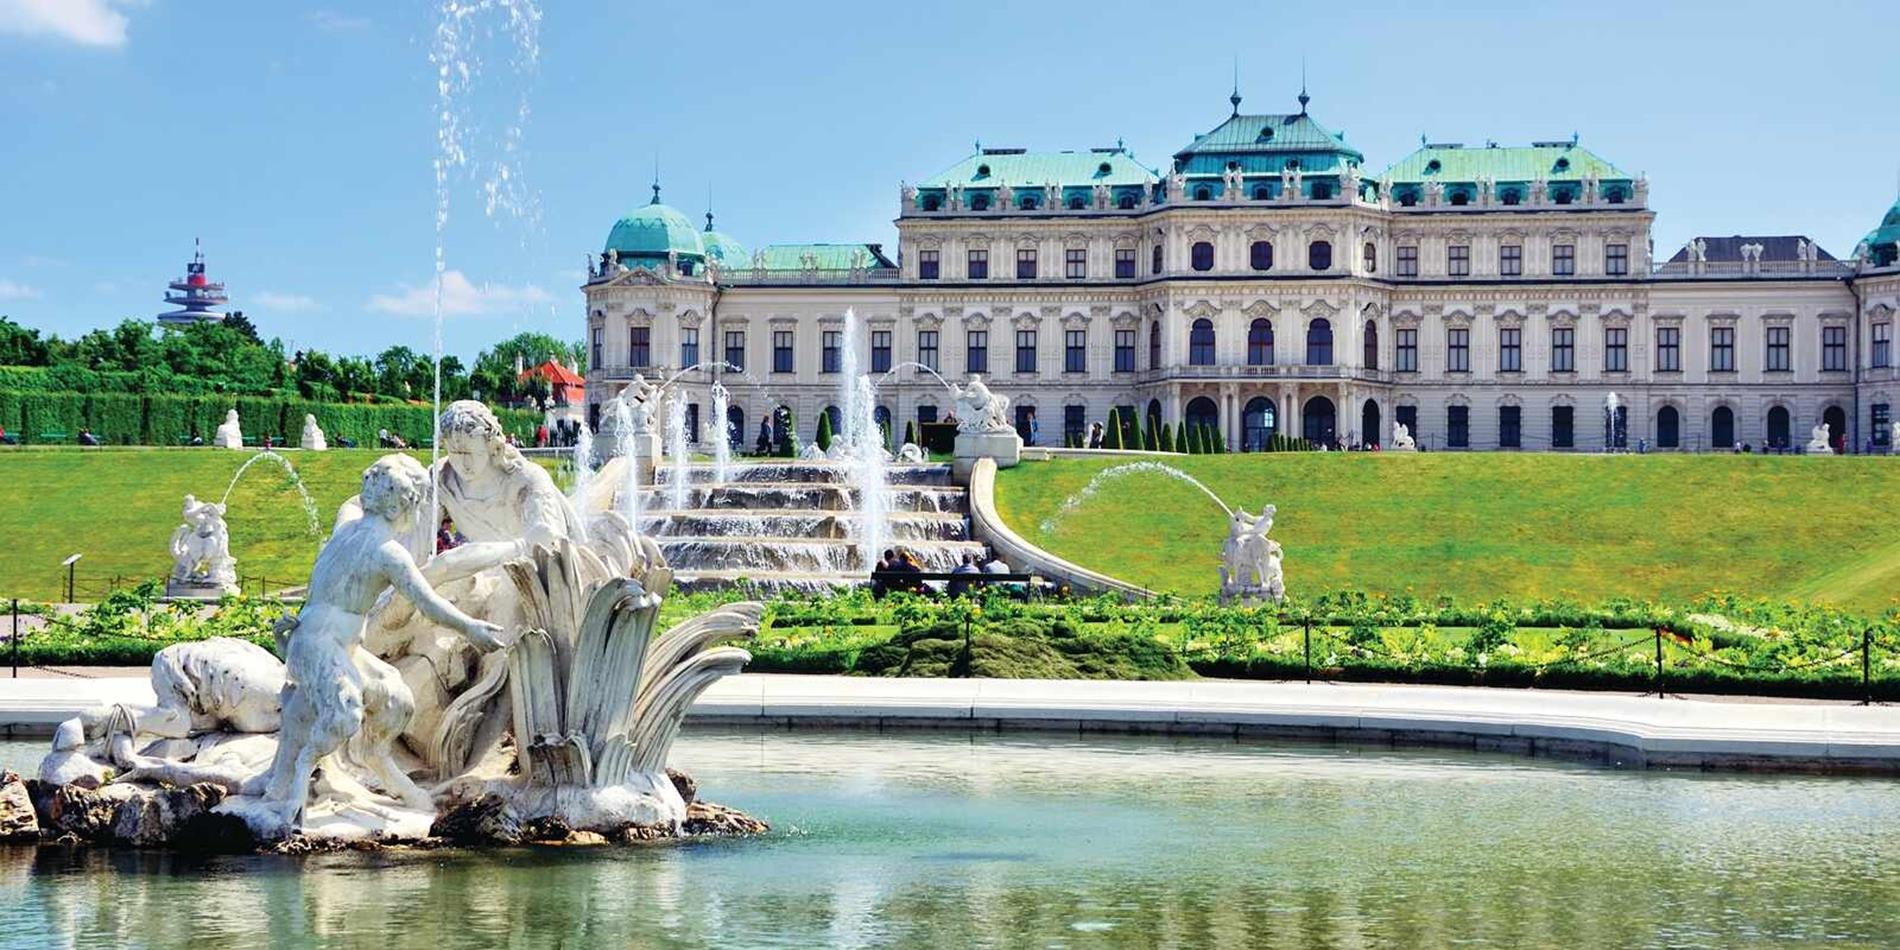 A fountain statue with the Belvedere Palace in the background